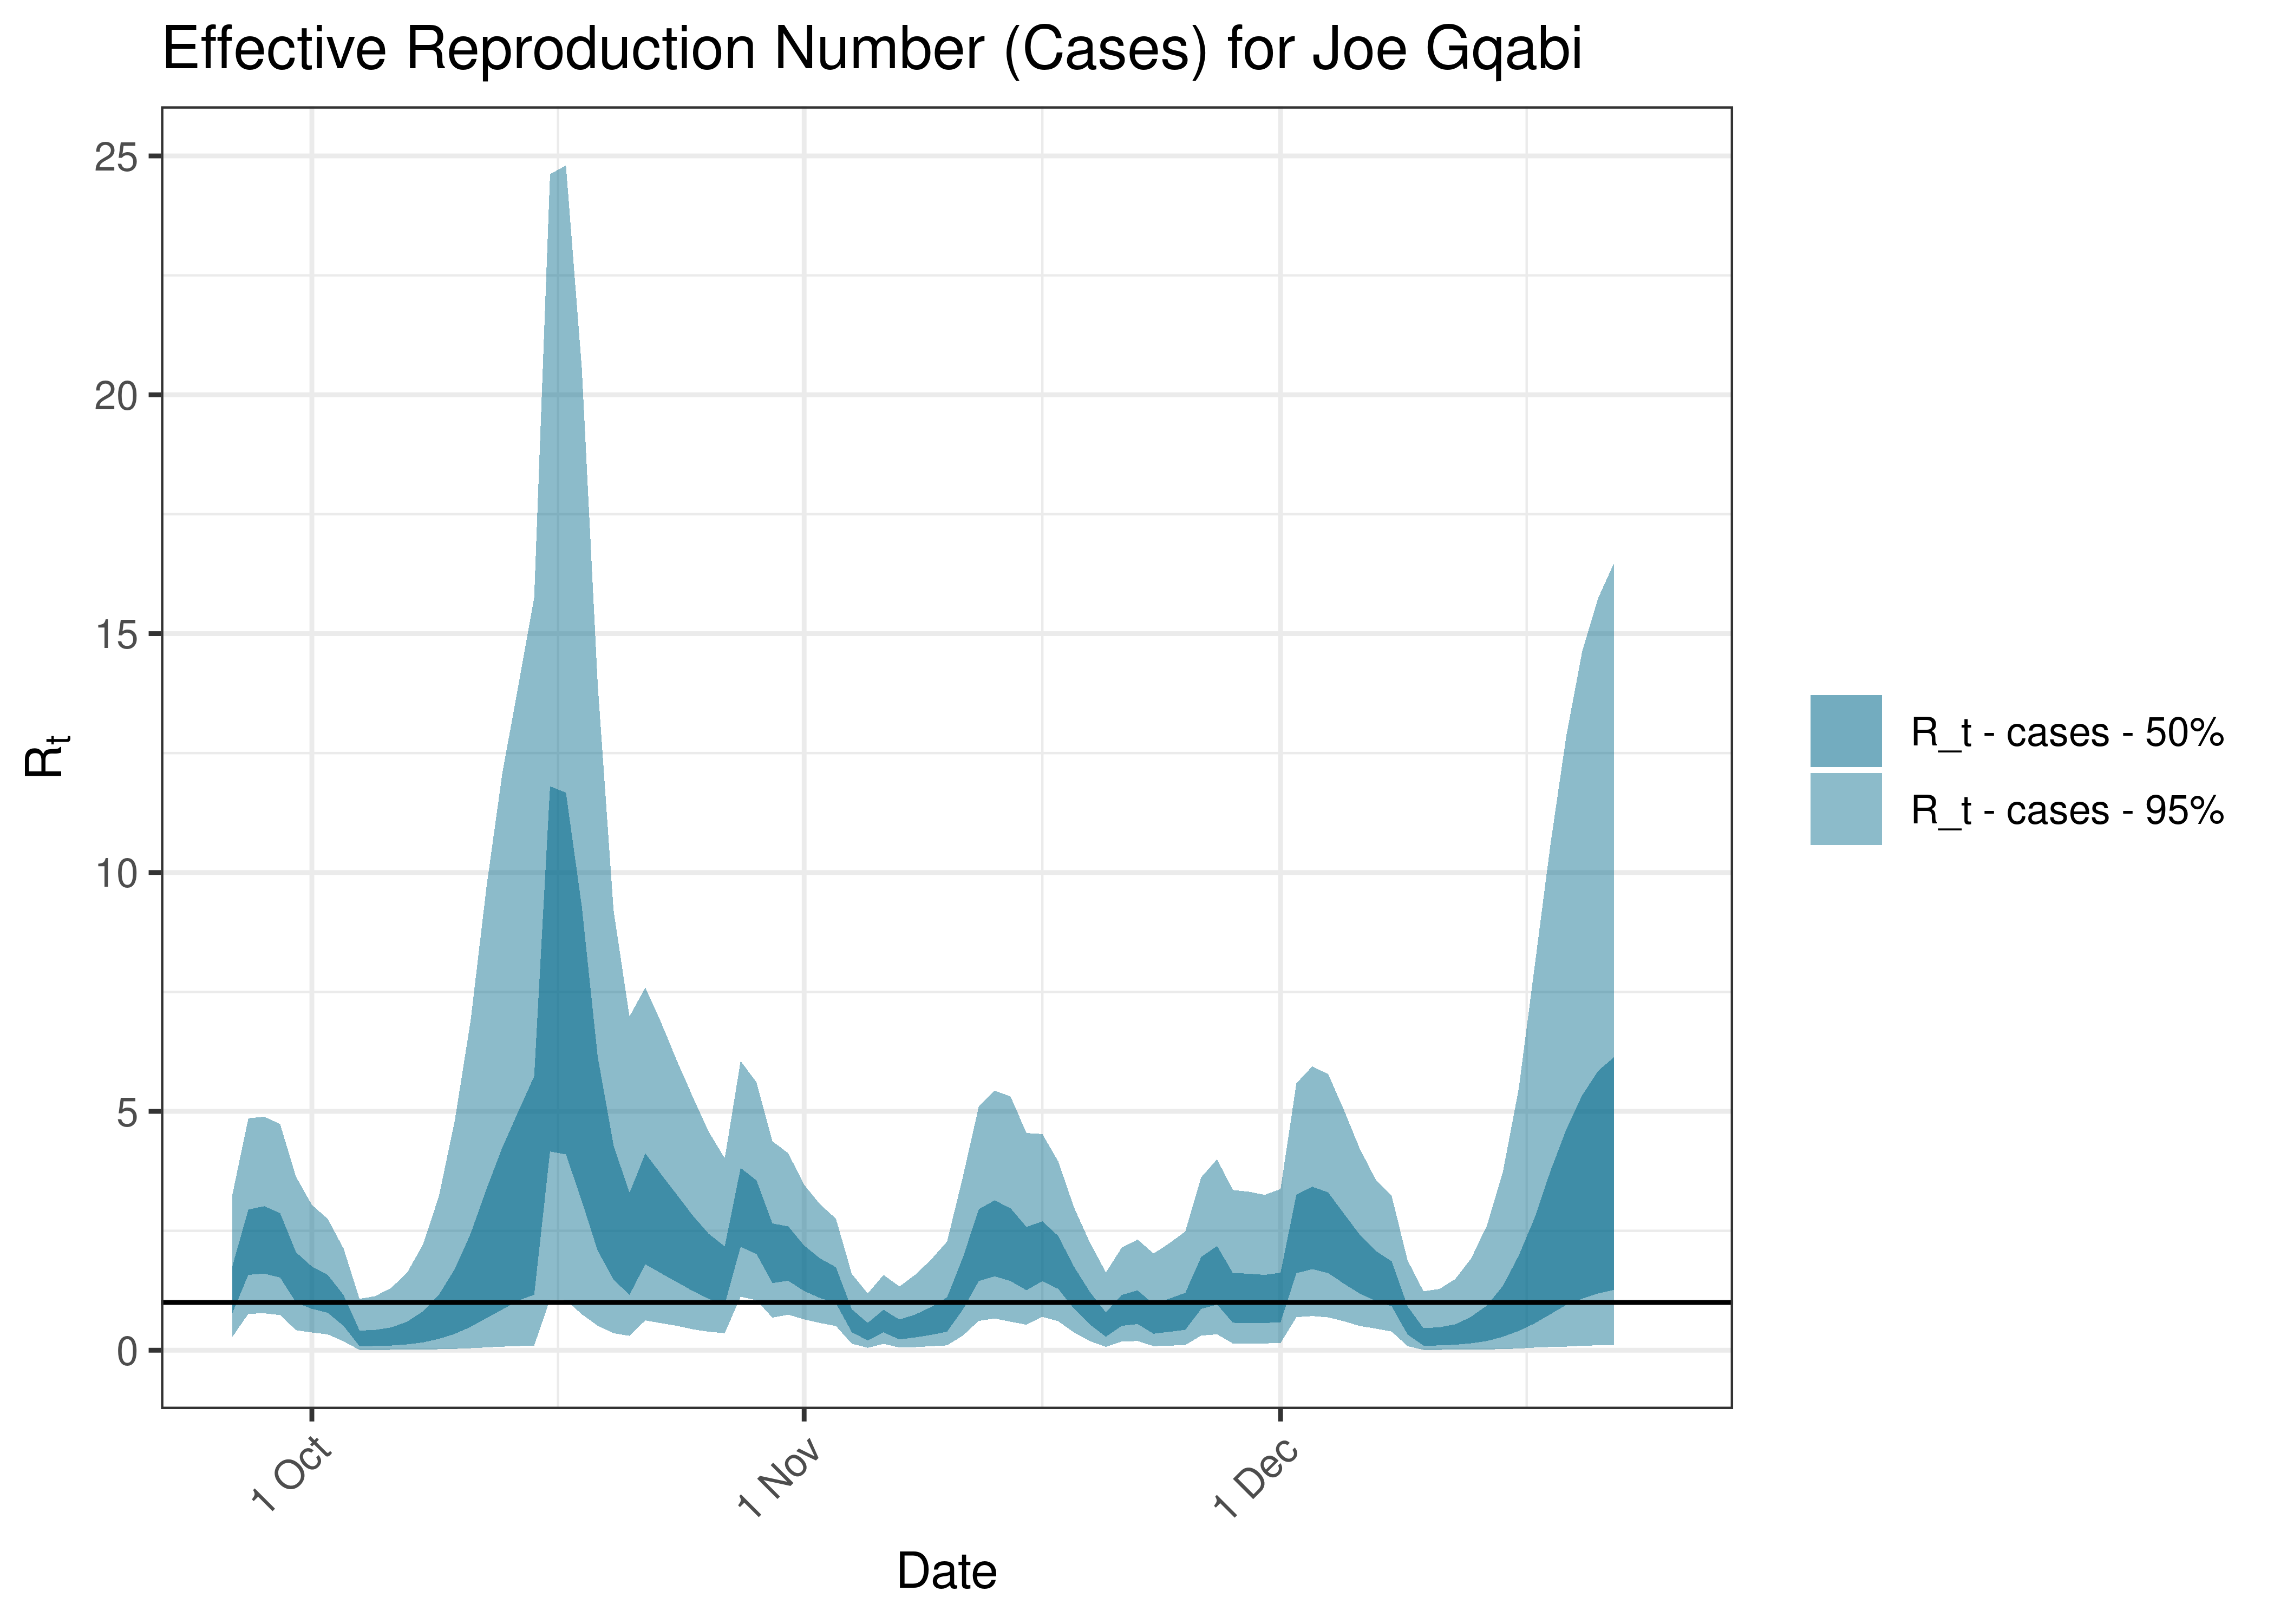 Estimated Effective Reproduction Number Based on Cases for Joe Gqabi over last 90 days